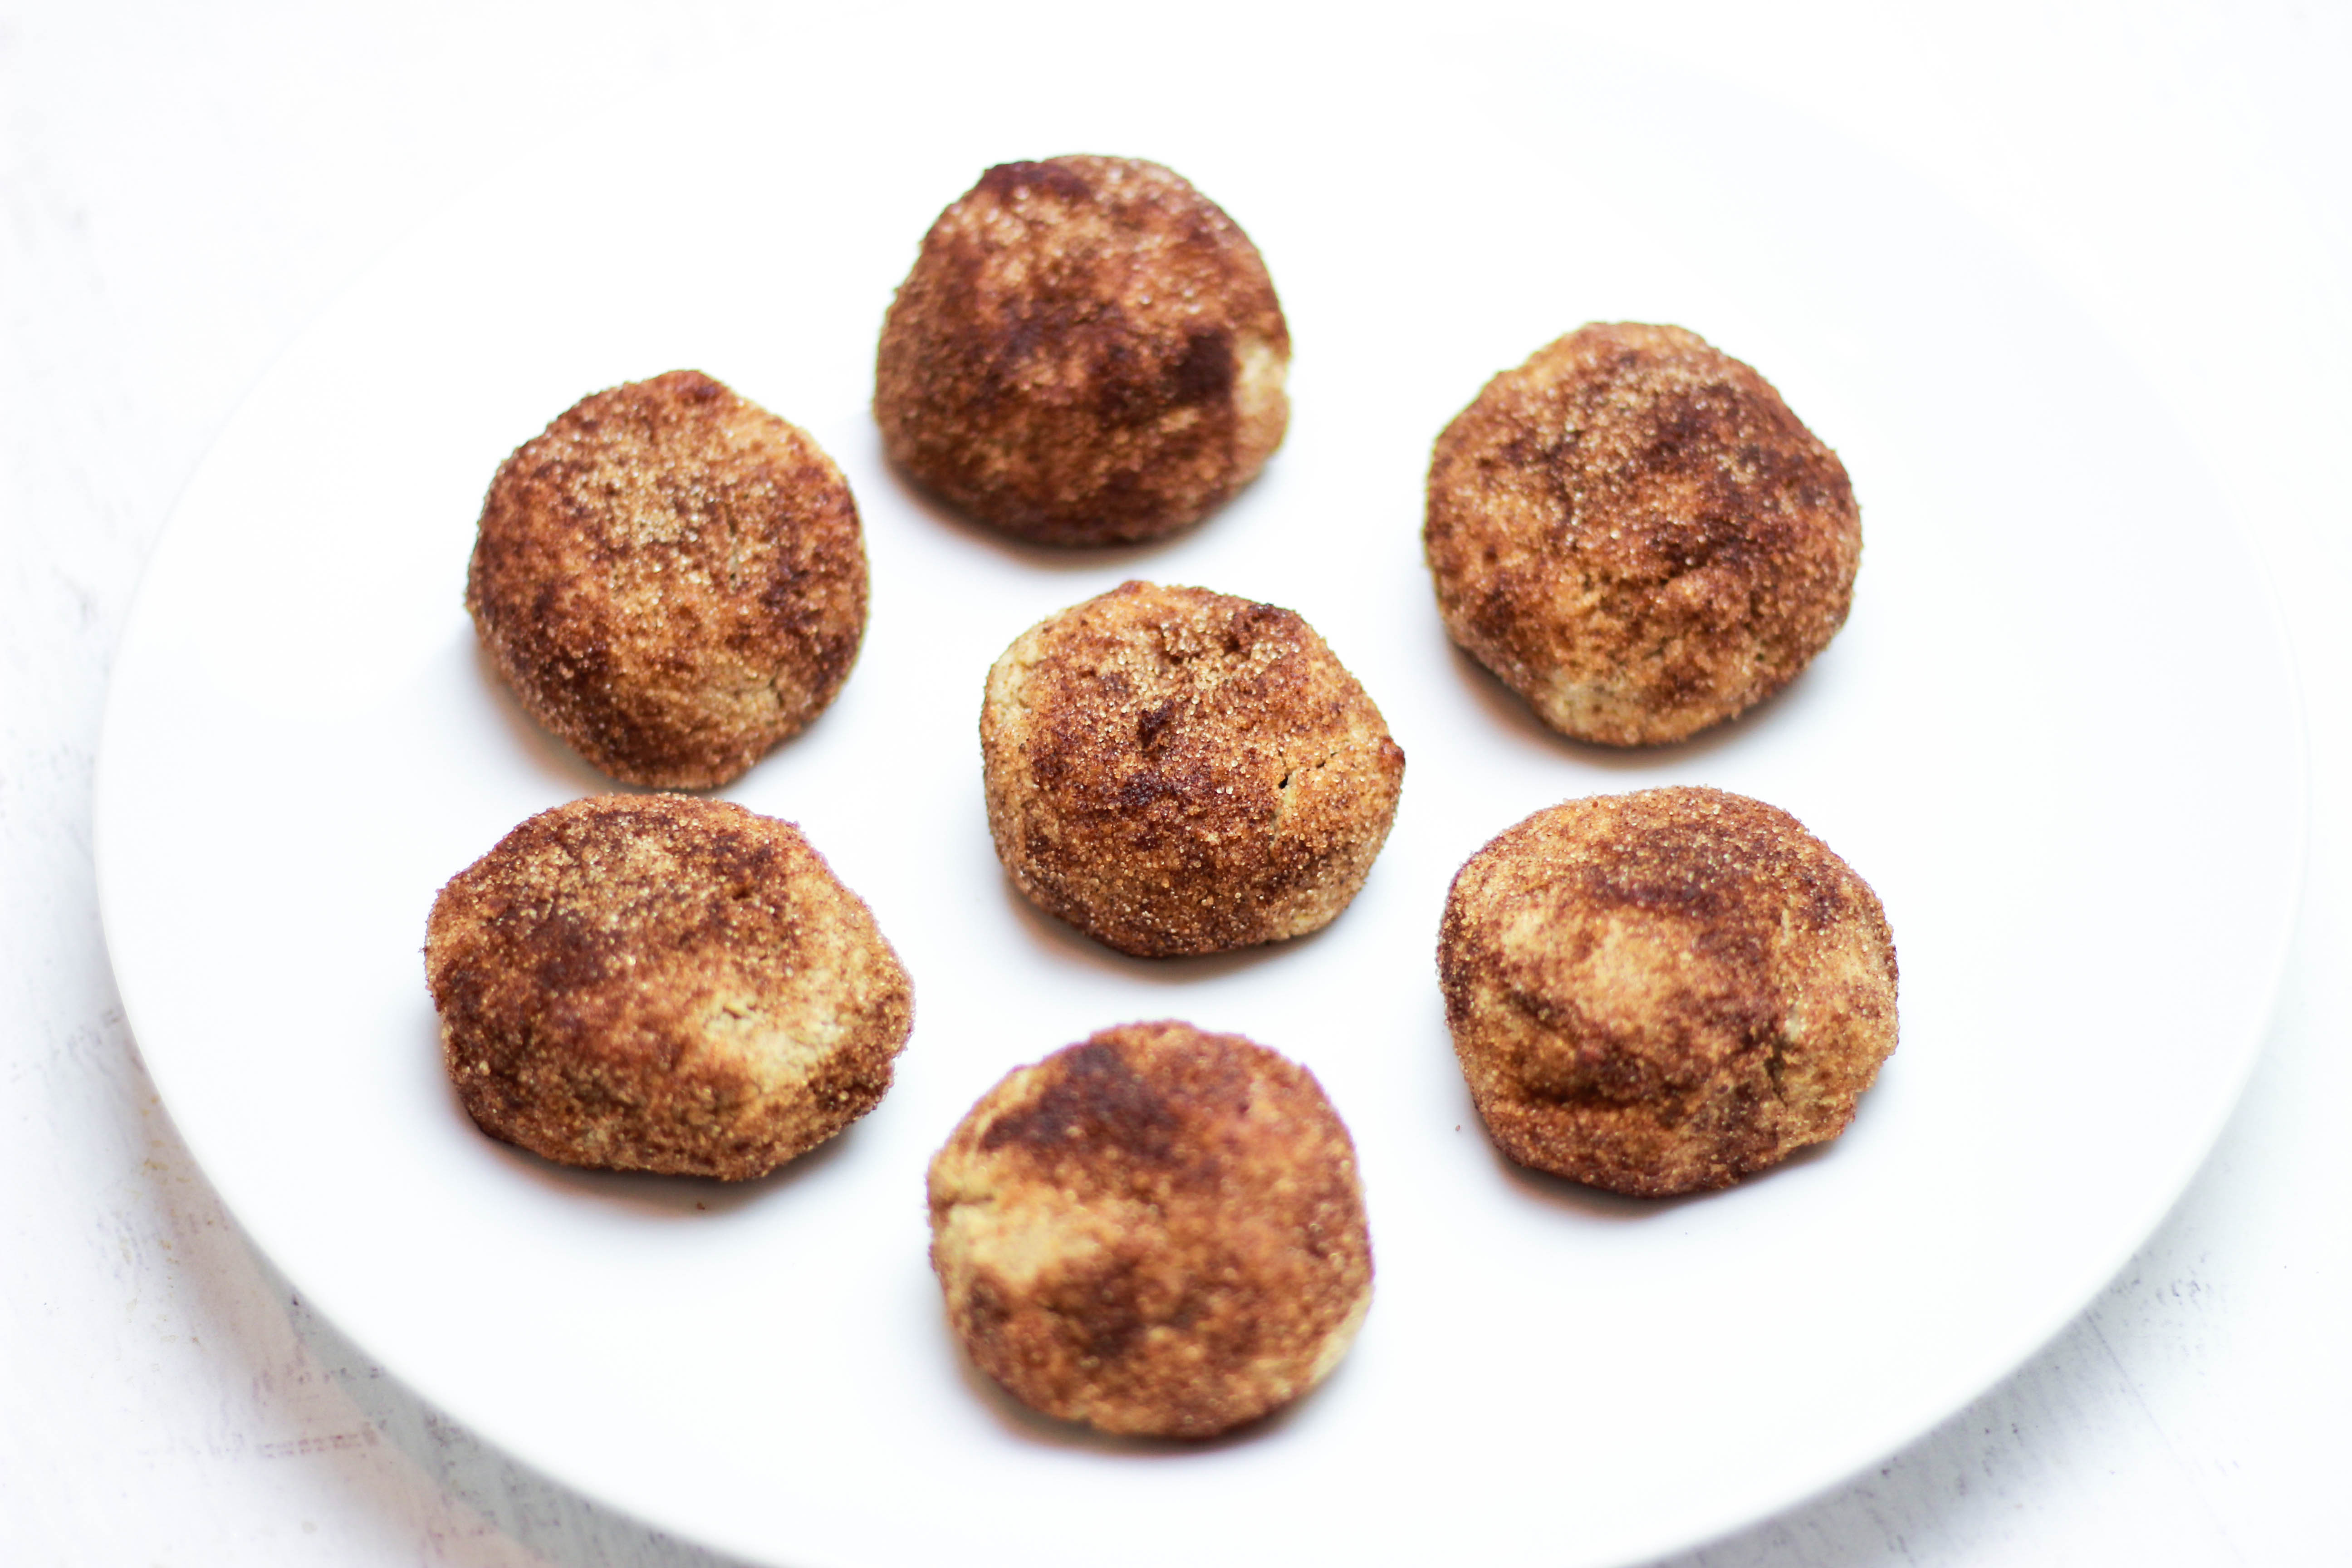 Paleo Chocolate Almond Butter Filled Snickerdoodles